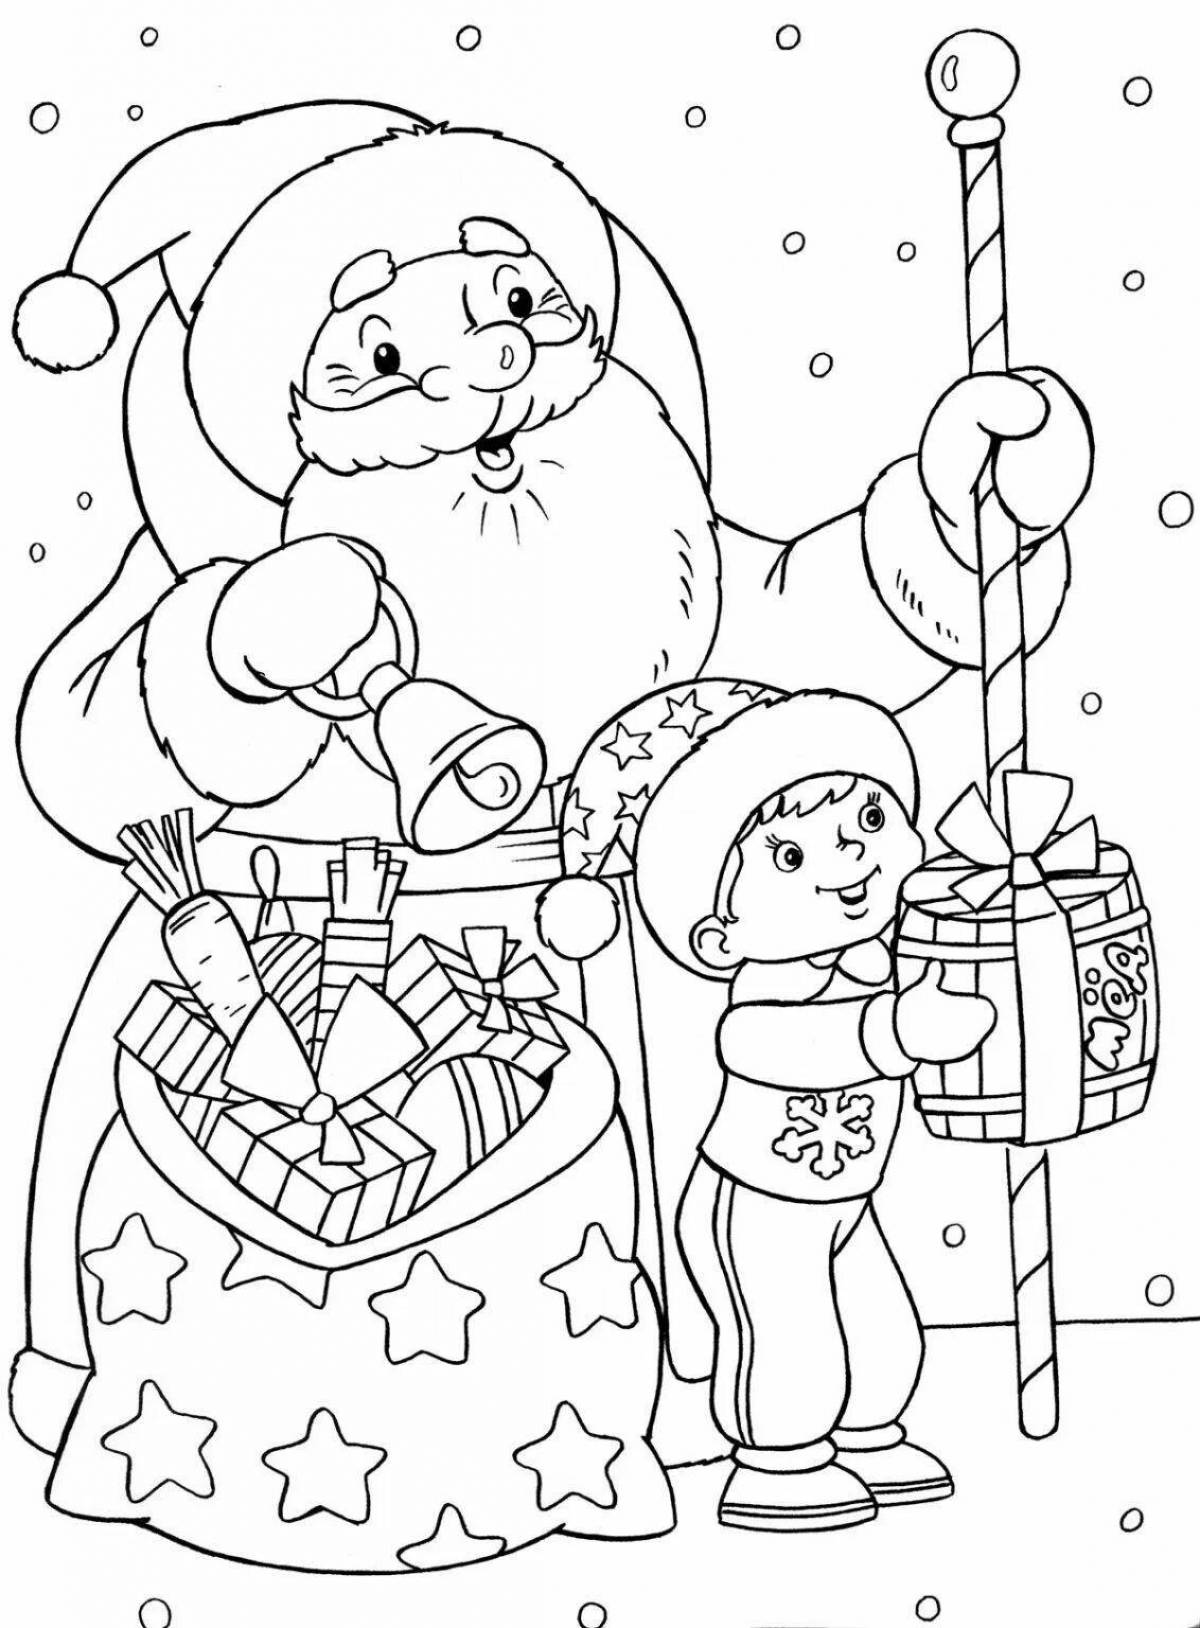 Charming Christmas coloring book for kids 6-7 years old